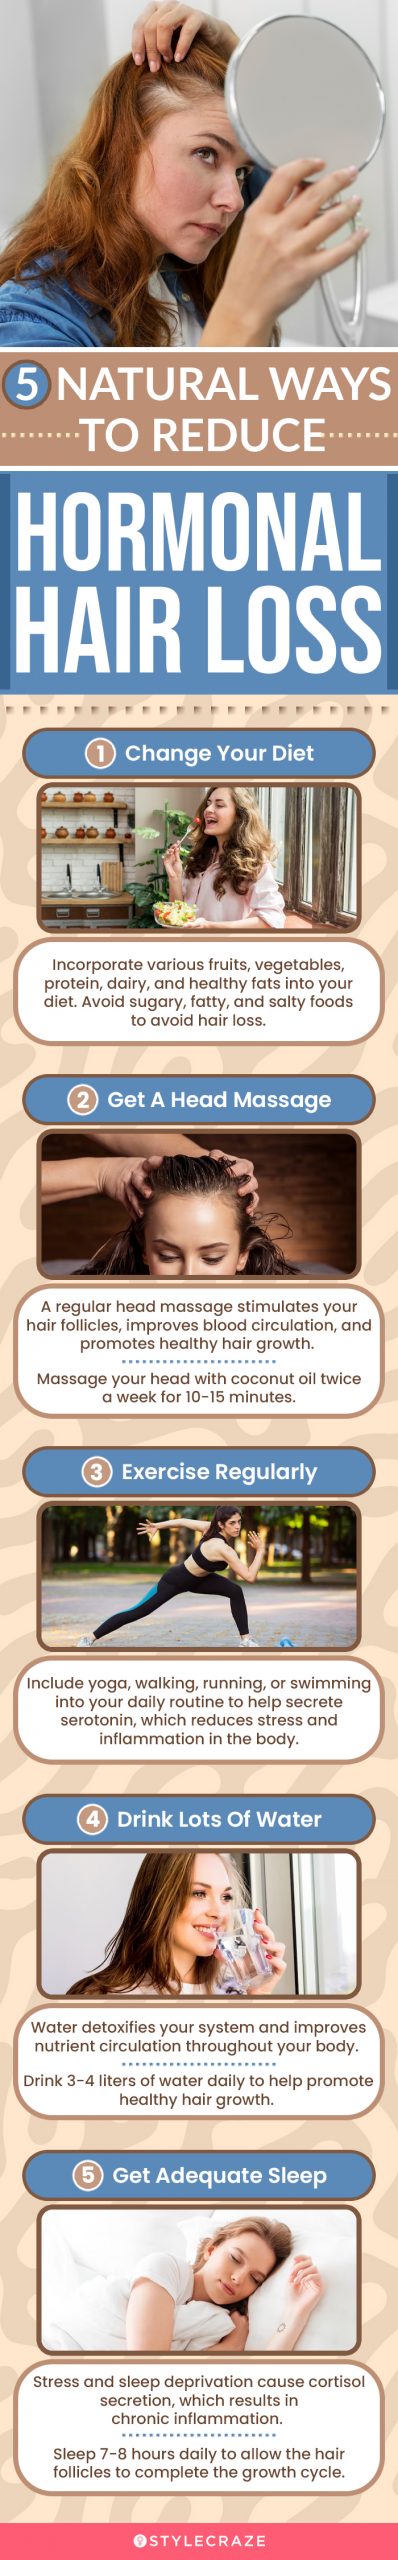 5 natural ways to reduce hormonal hair loss (infographic)